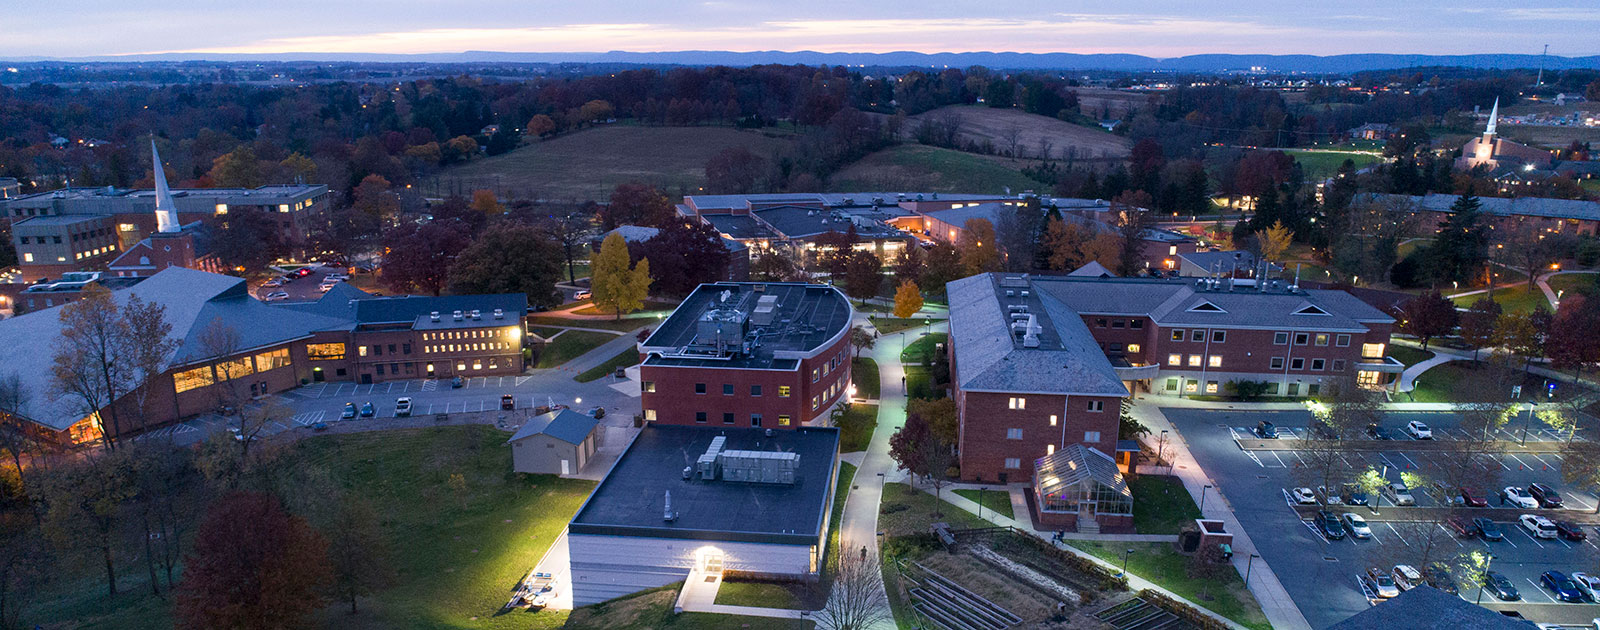 Year in review, aerial view of Messiah College